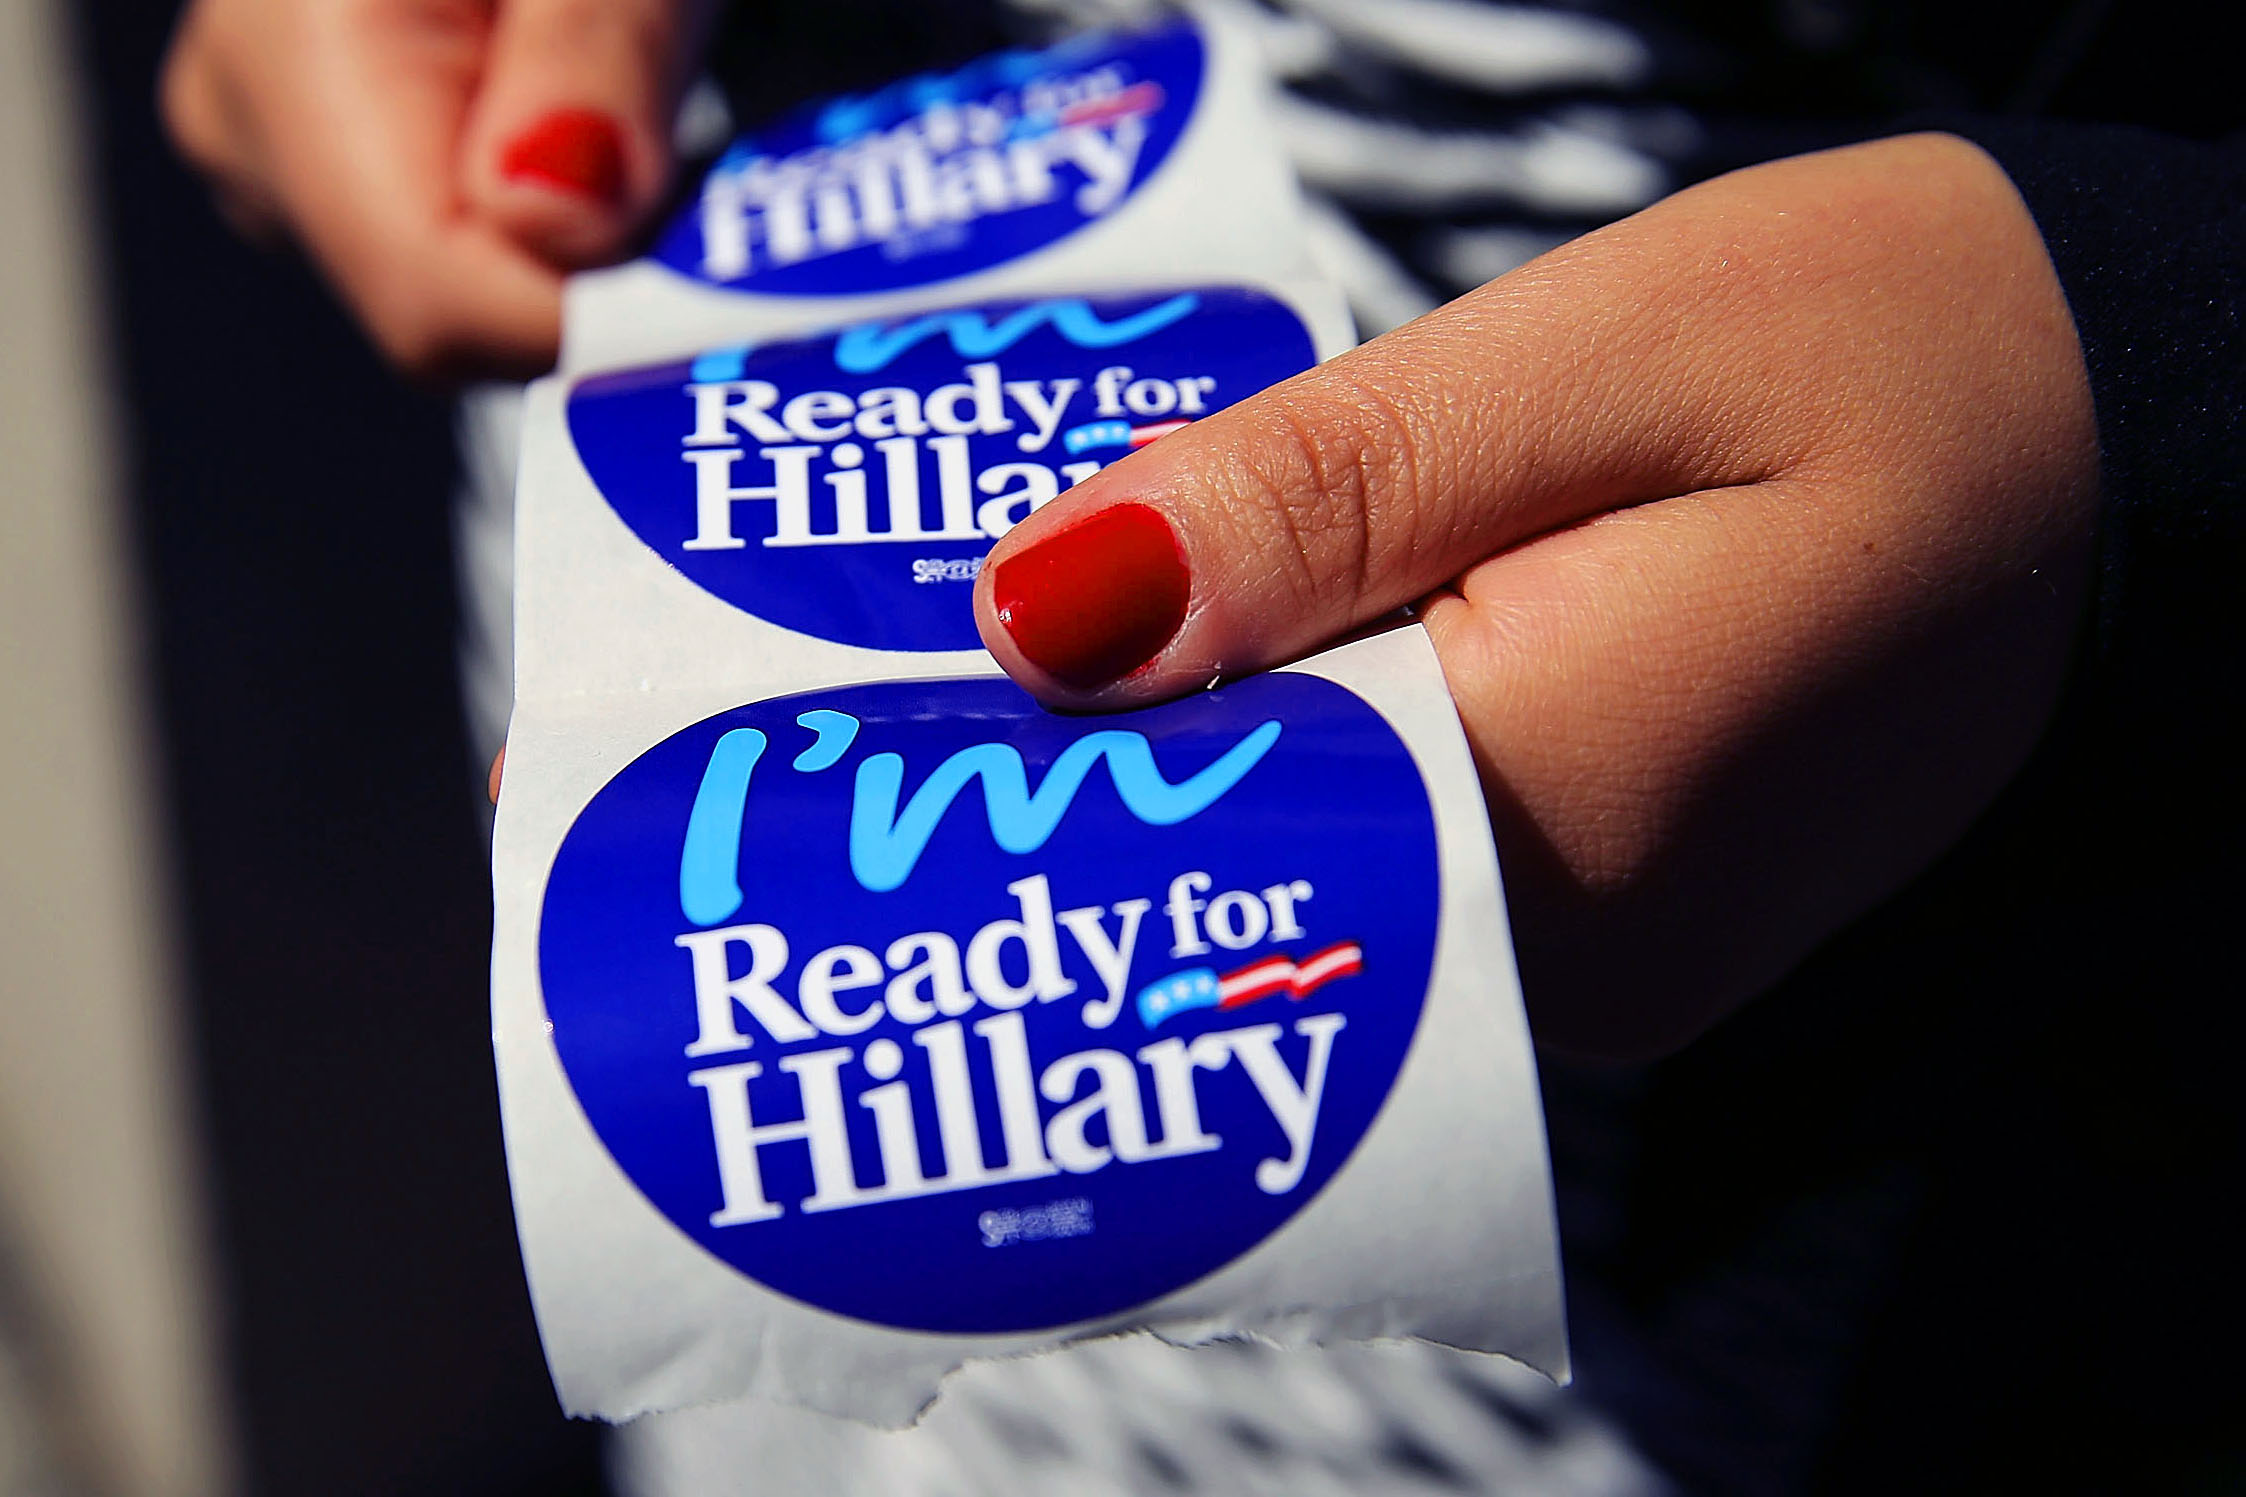 'Ready for Hillary' stickers, in support of Hillary Clinton.